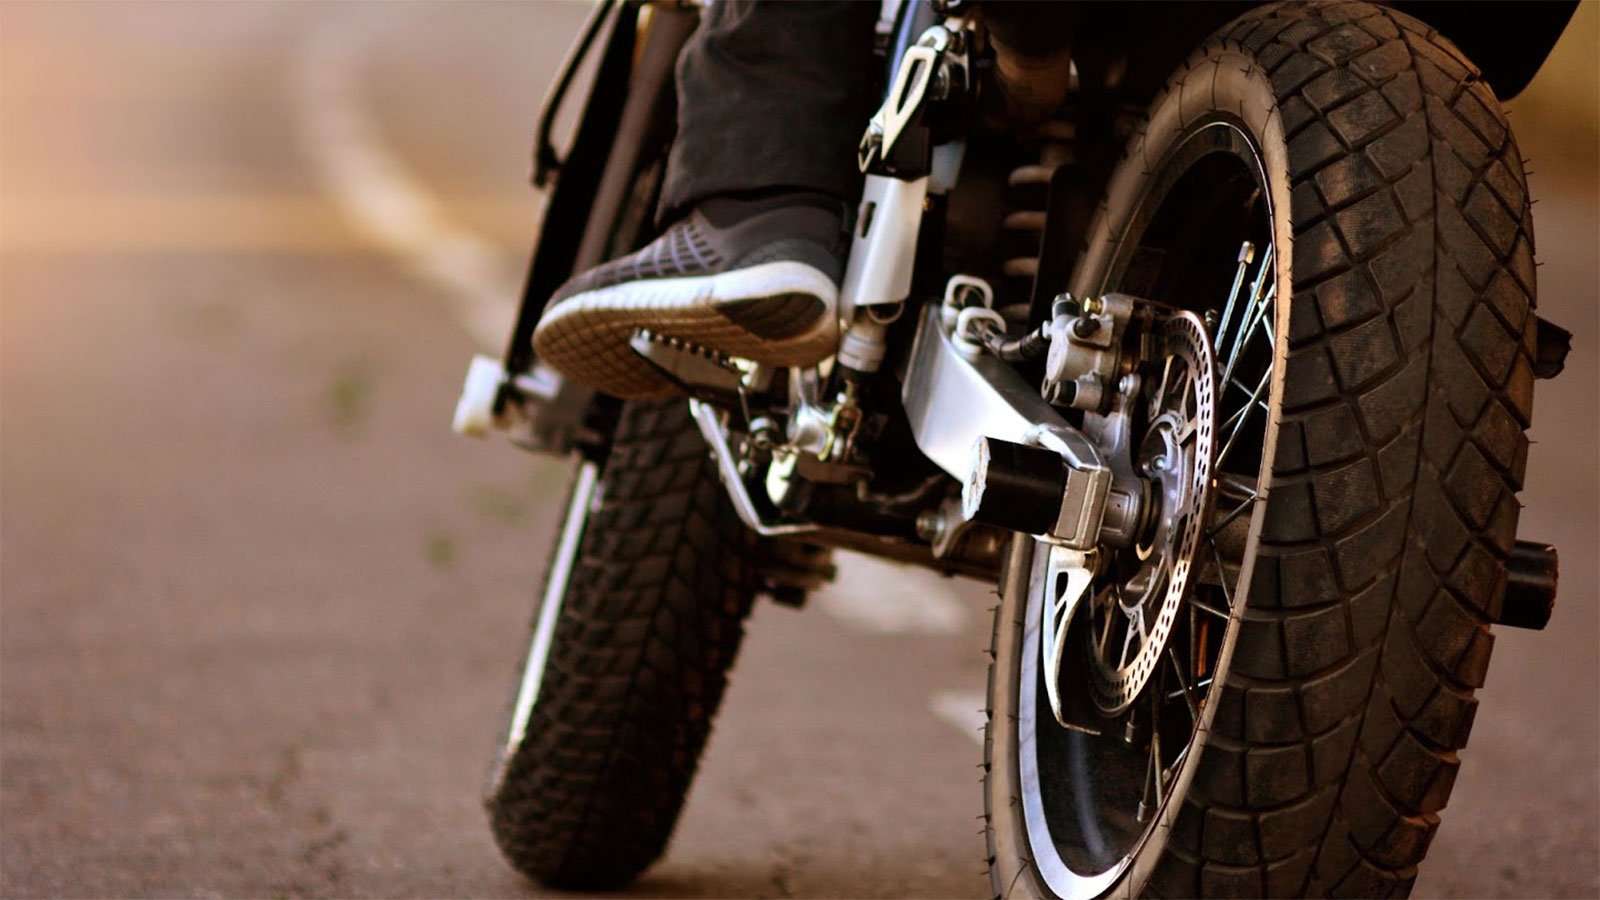 Motorcycle Risk & TBI